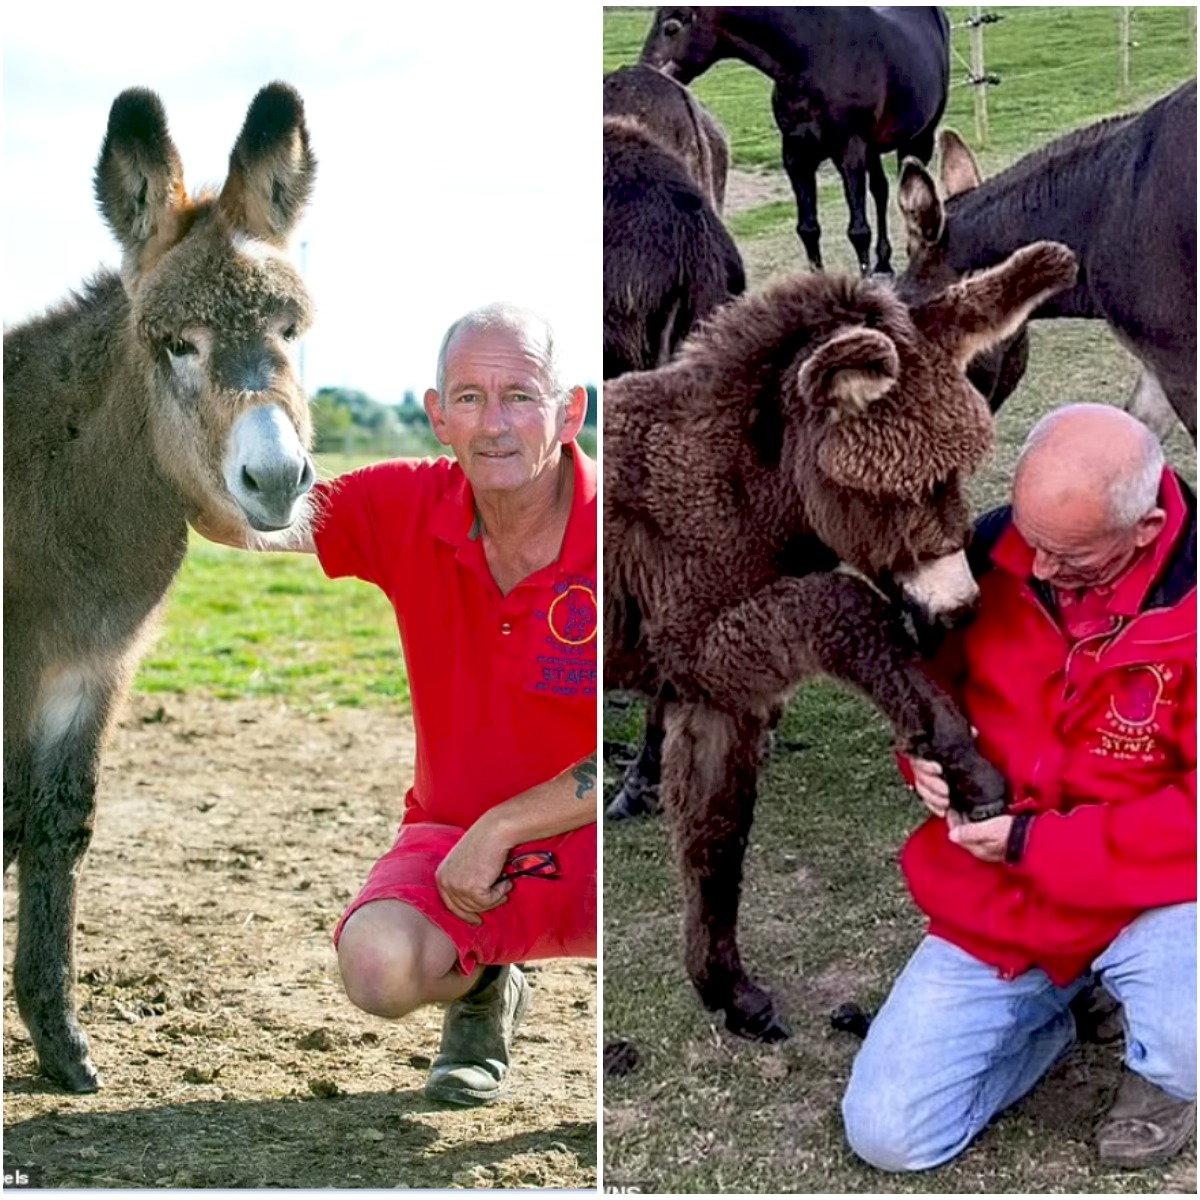 Seaside donkey boss sparks by WEIGHING children before allowing them to ride – as he declares ‘some are just too big’